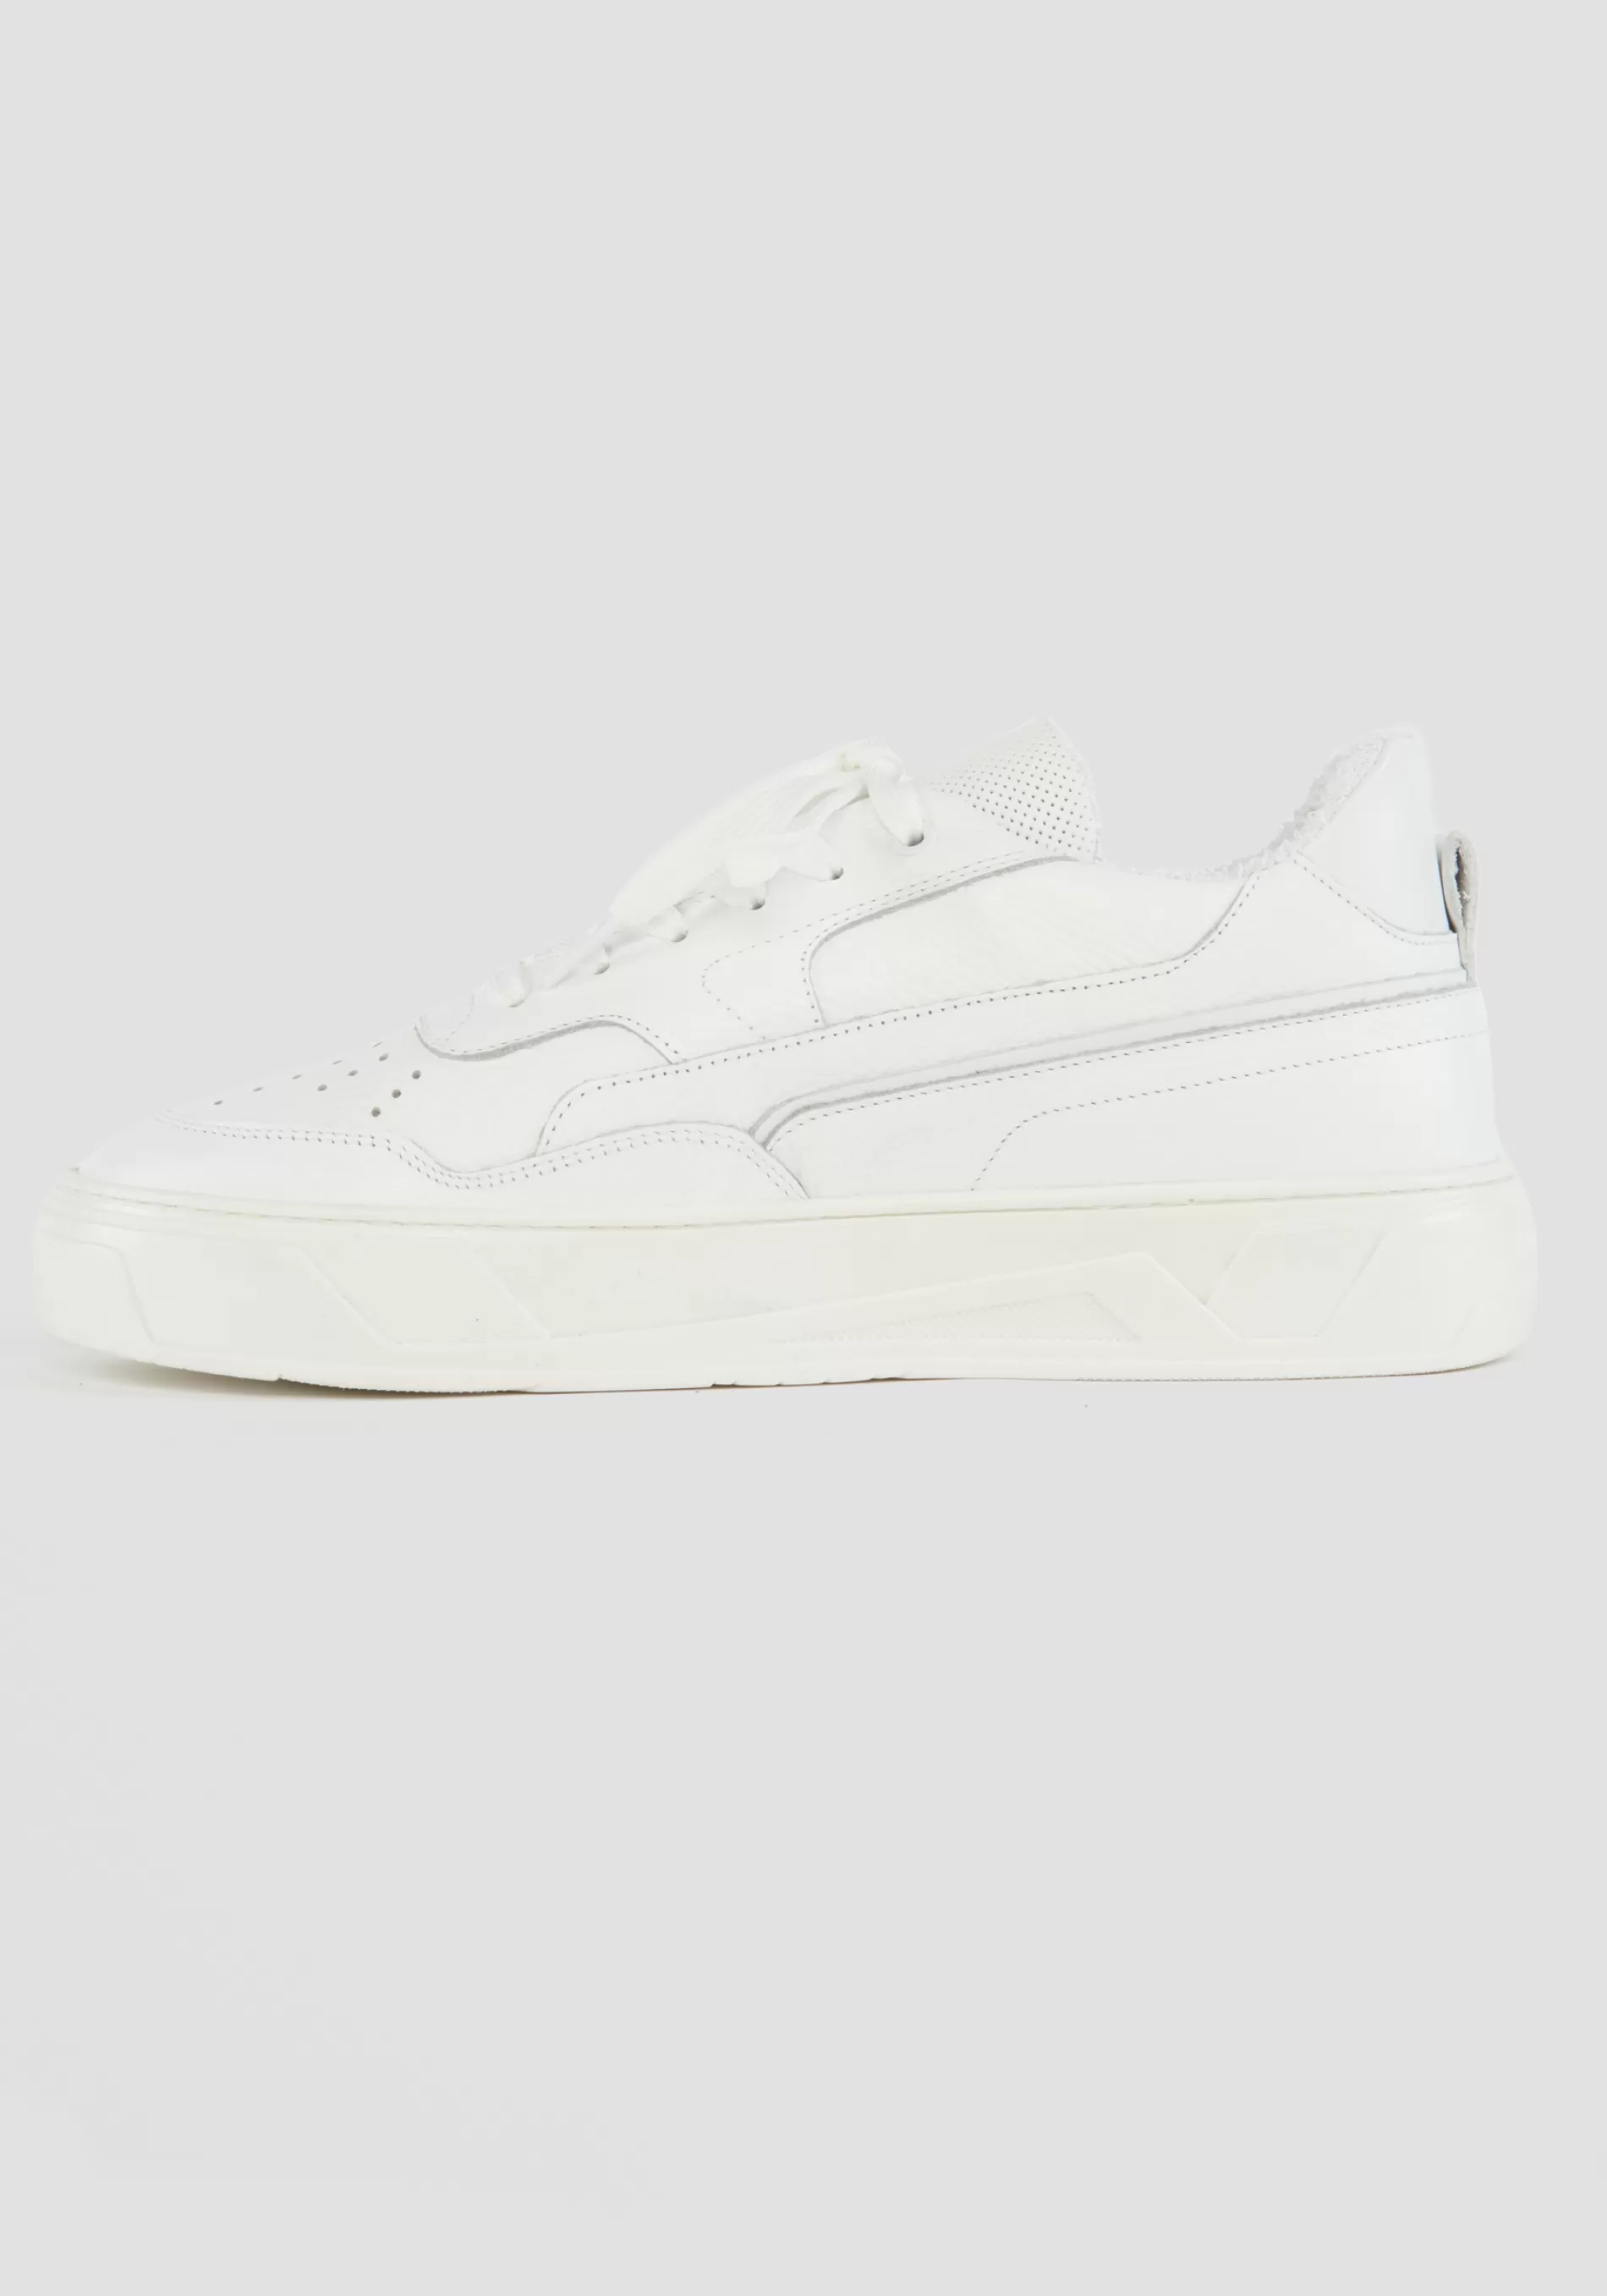 Clearance "707" LOW-TOP LEATHER SNEAKERS Sneakers